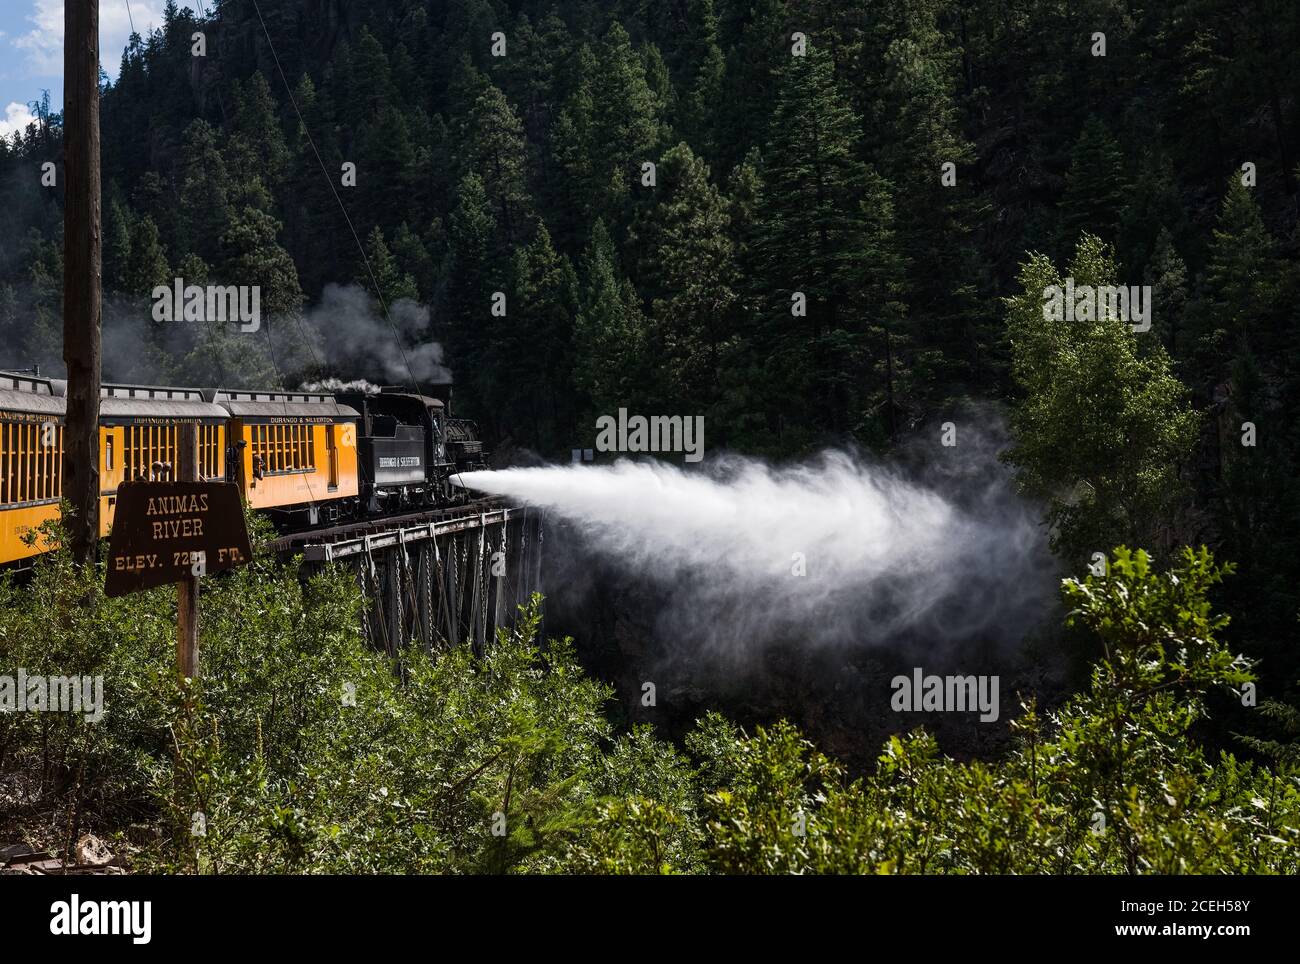 The engineer blows down the steam engine as it crosses the High Bridge across the Animas River.   Durango and Silverton Narrow Gauge Railroad in Color Stock Photo